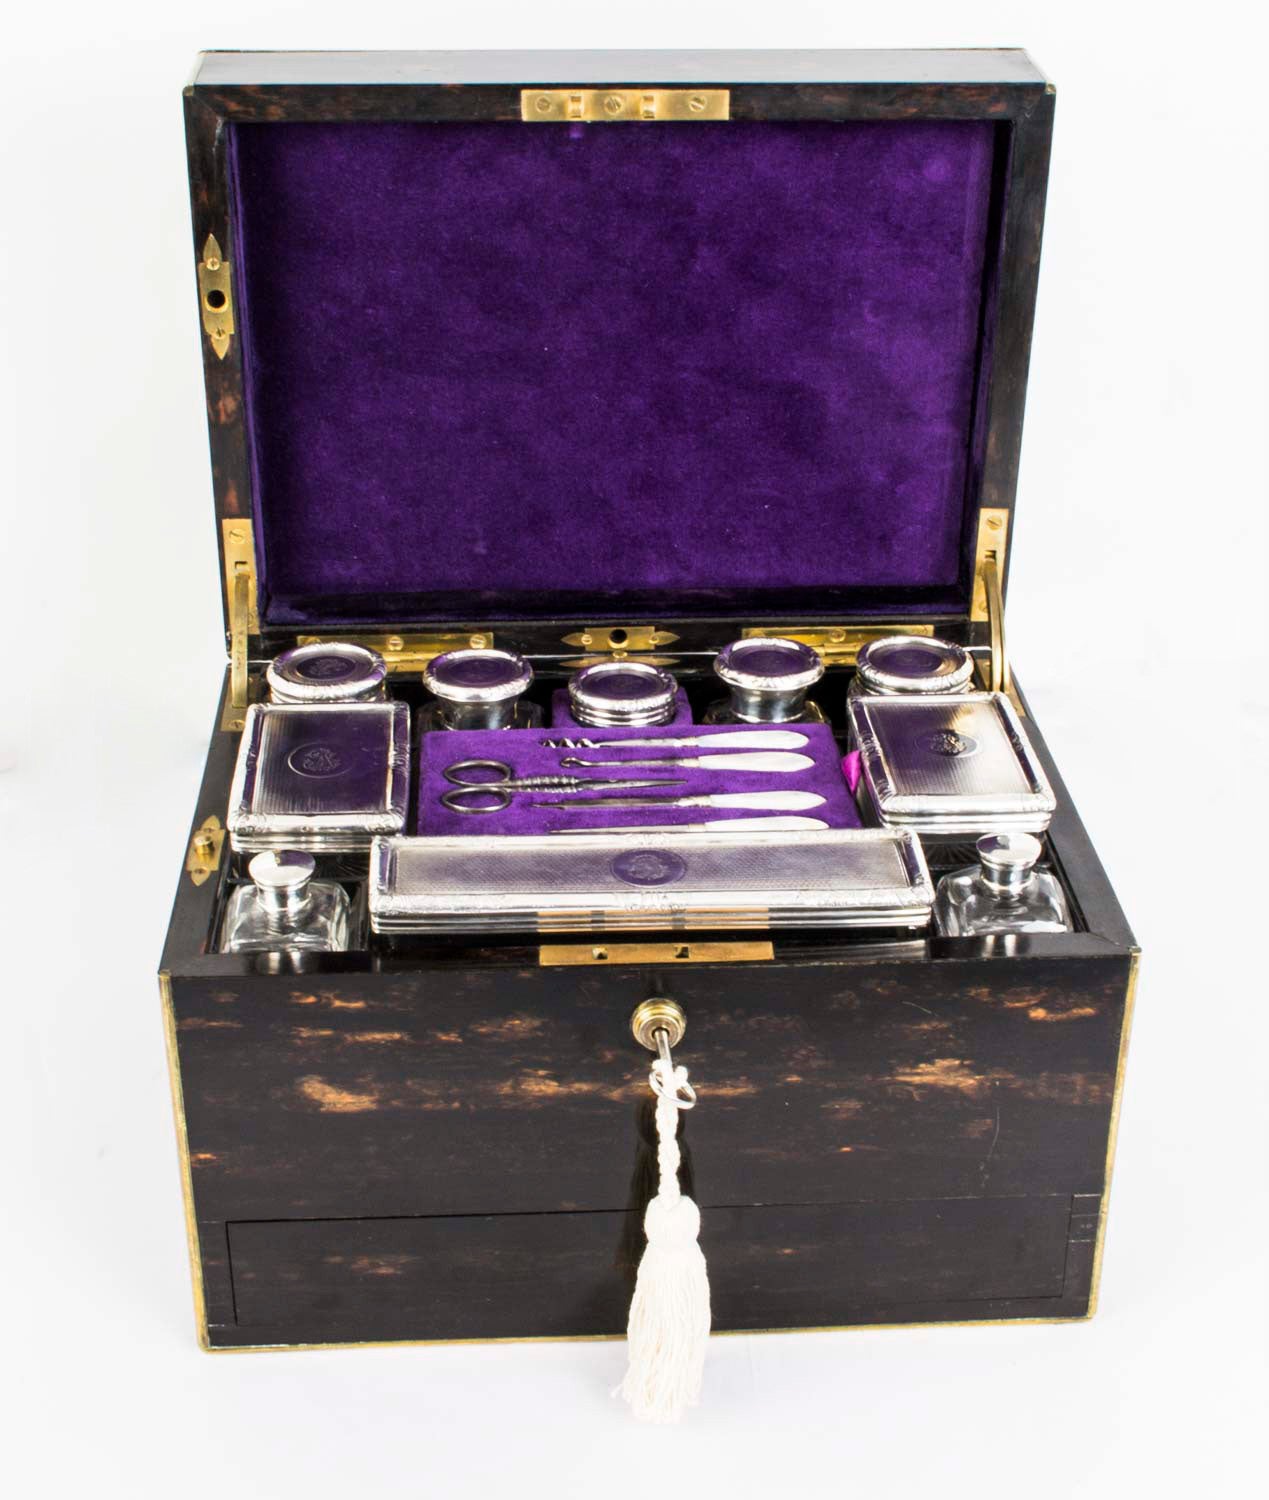 This is a stunning antique Victorian lady's traveling case, the sterling silver topped jars and bottles have hallmarks for London 1878 and the makers mark of the renowned silversmith and box maker George Betjemann & Sons. 

The case has the mark